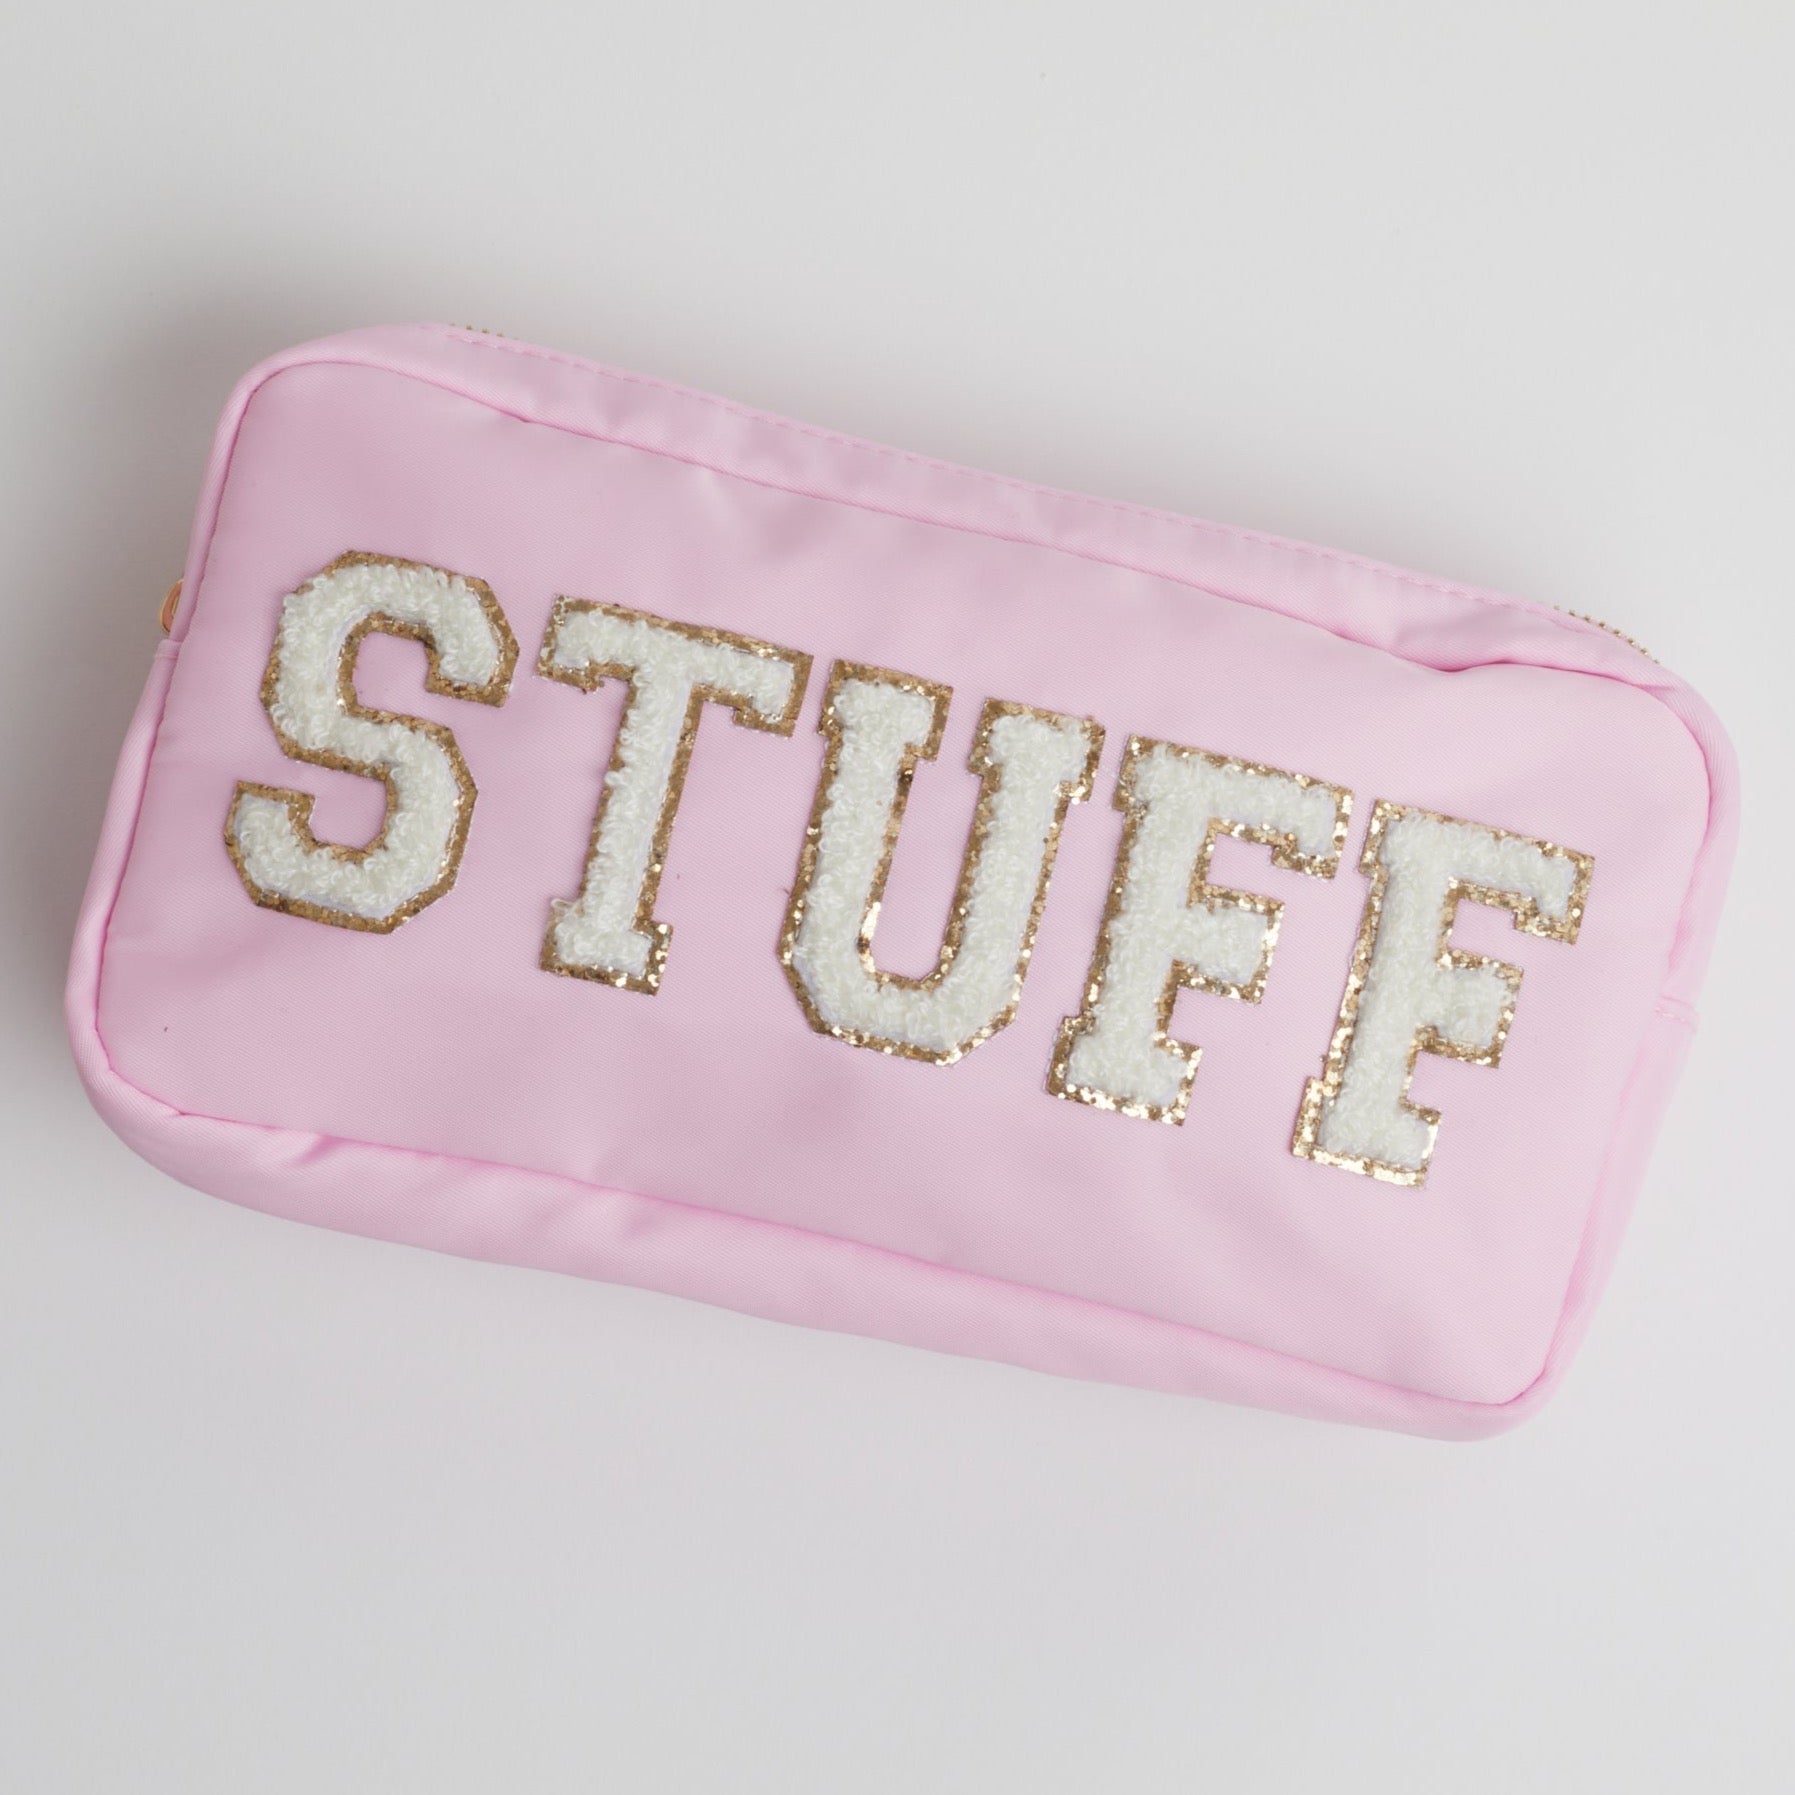 A pink cosmetic bag with white terry cloth letters spelling out "STUFF" on a white background.